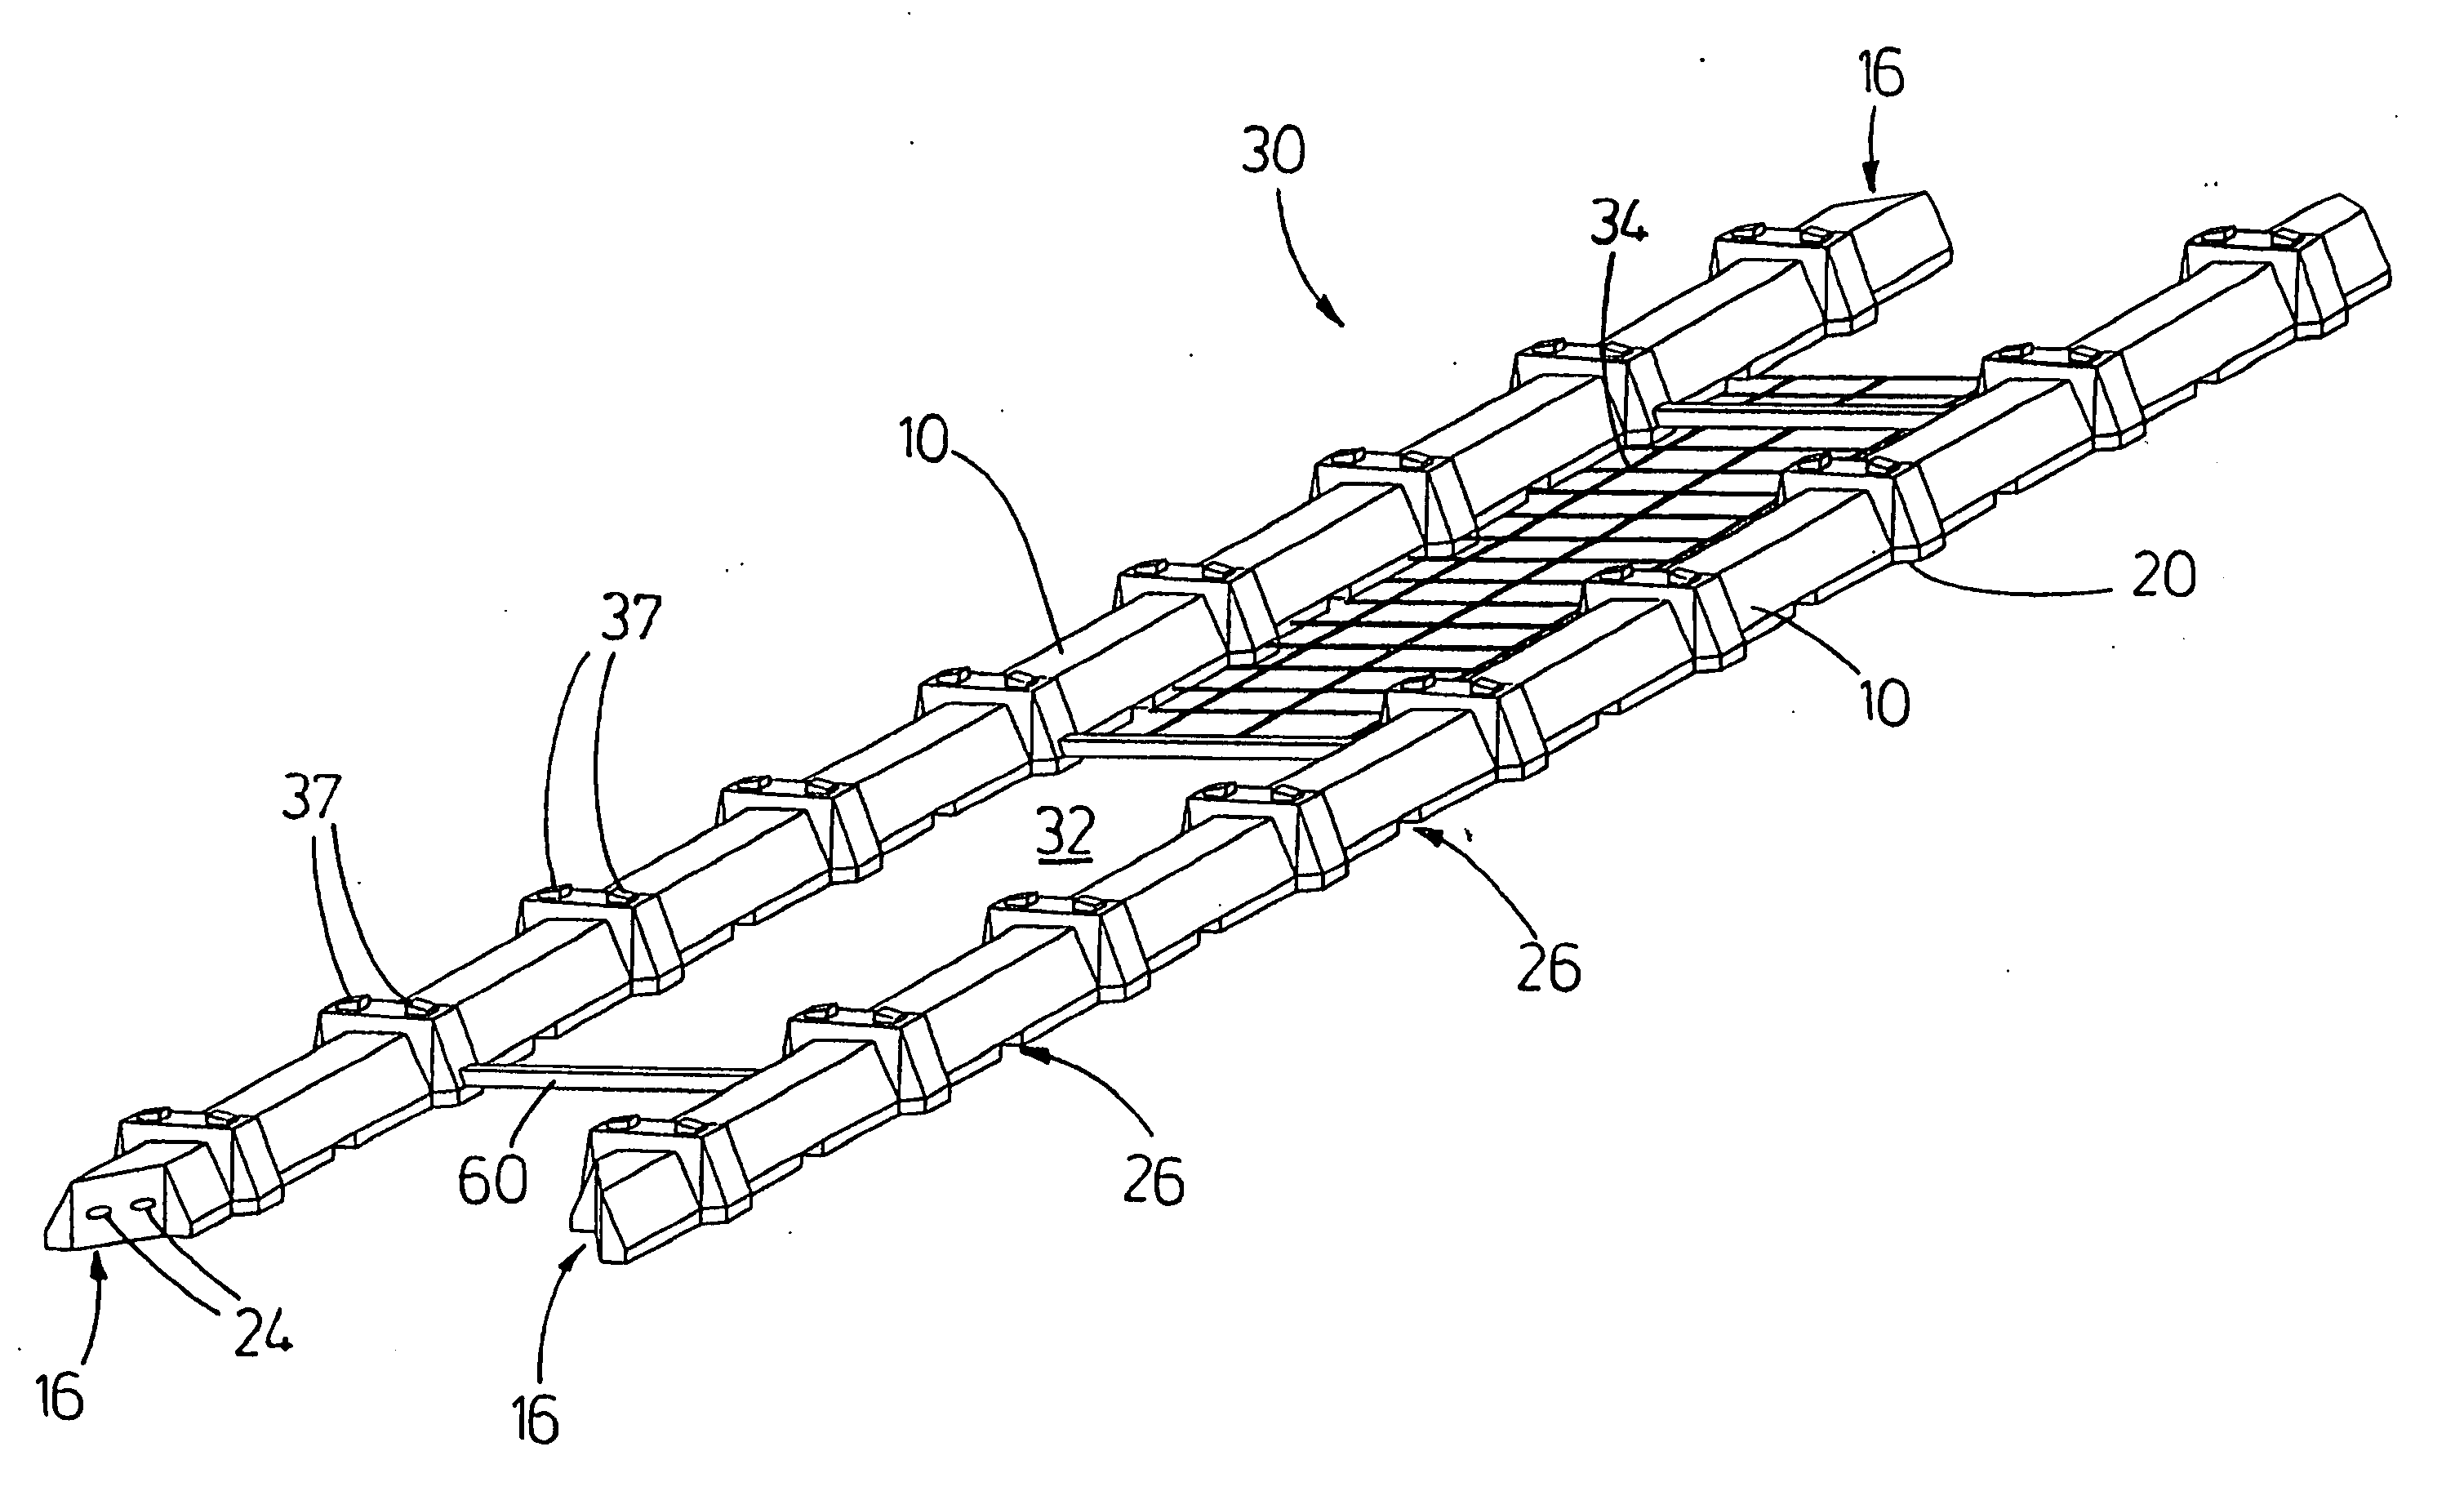 Rail sleeper and ballast-free track structure